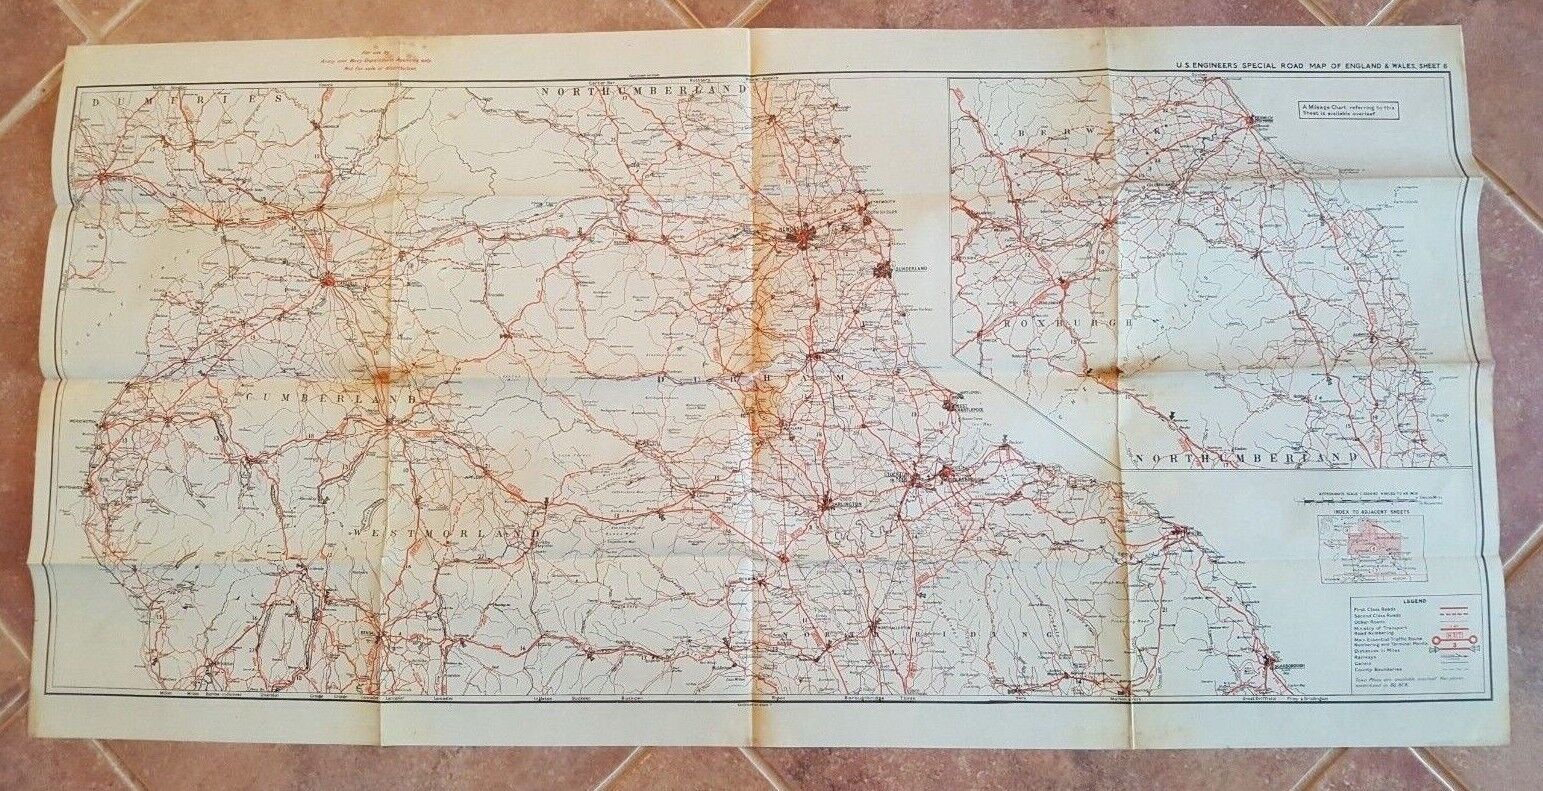 WWII Era - US ENGINEERS SPECIAL ROAD MAP OF ENGLAND & WALES (SHEET 8)